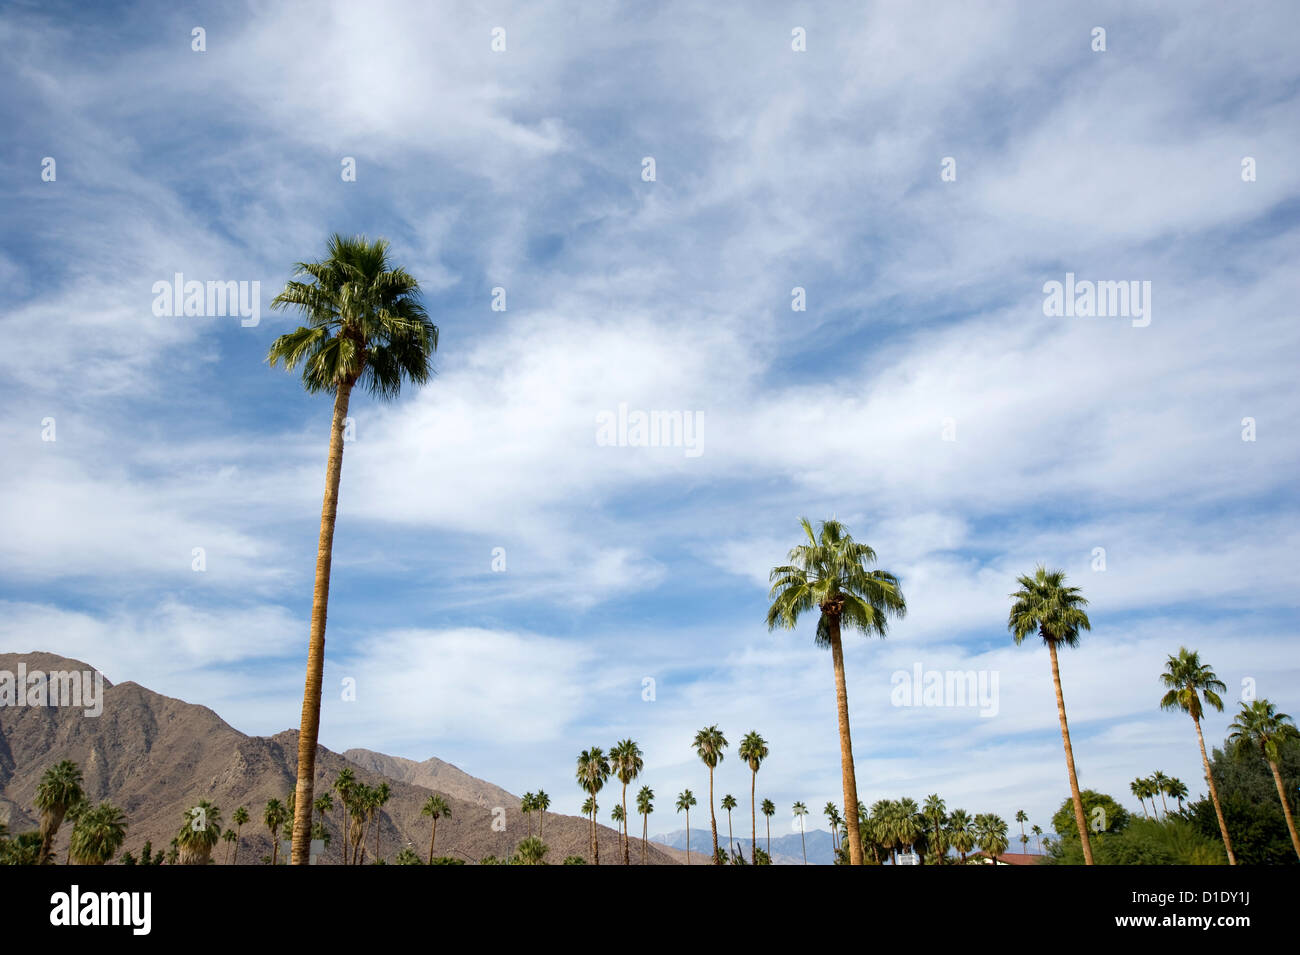 Scenic view of  palm trees and mountains at Palm Springs, California Stock Photo